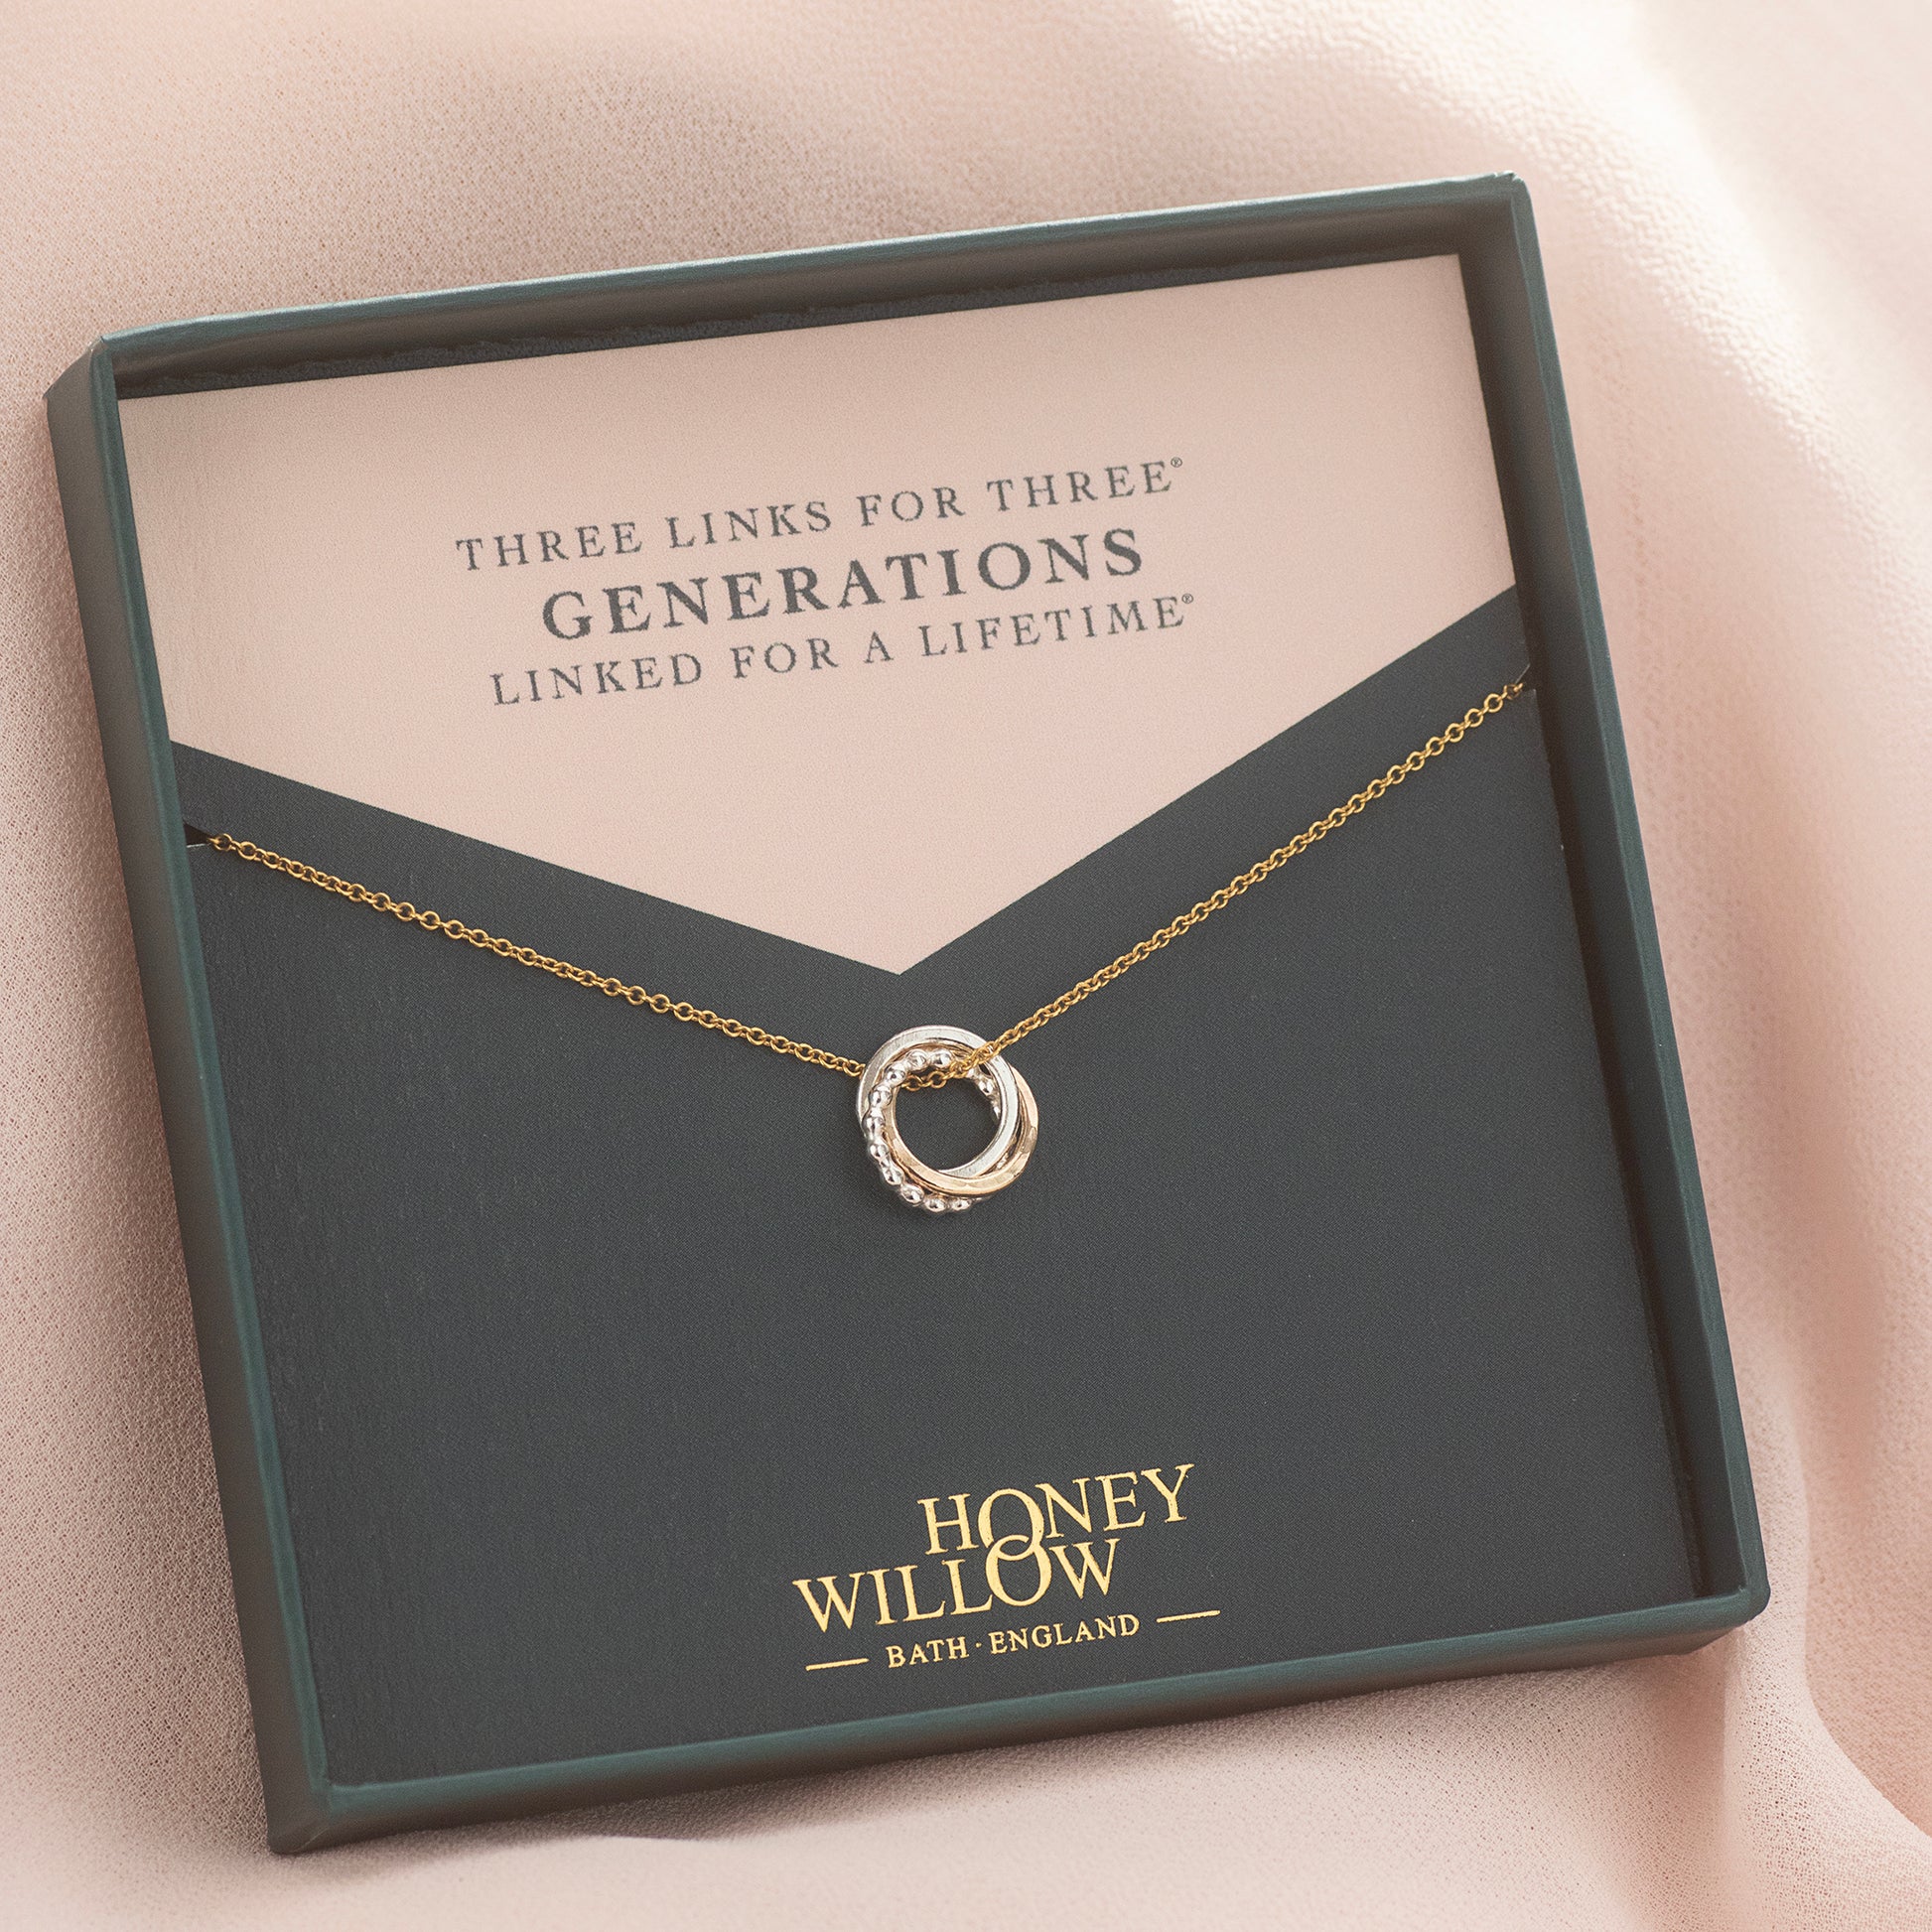 Family Links Necklace - 3 Links for 3 Generations - Silver & Gold Love Knot